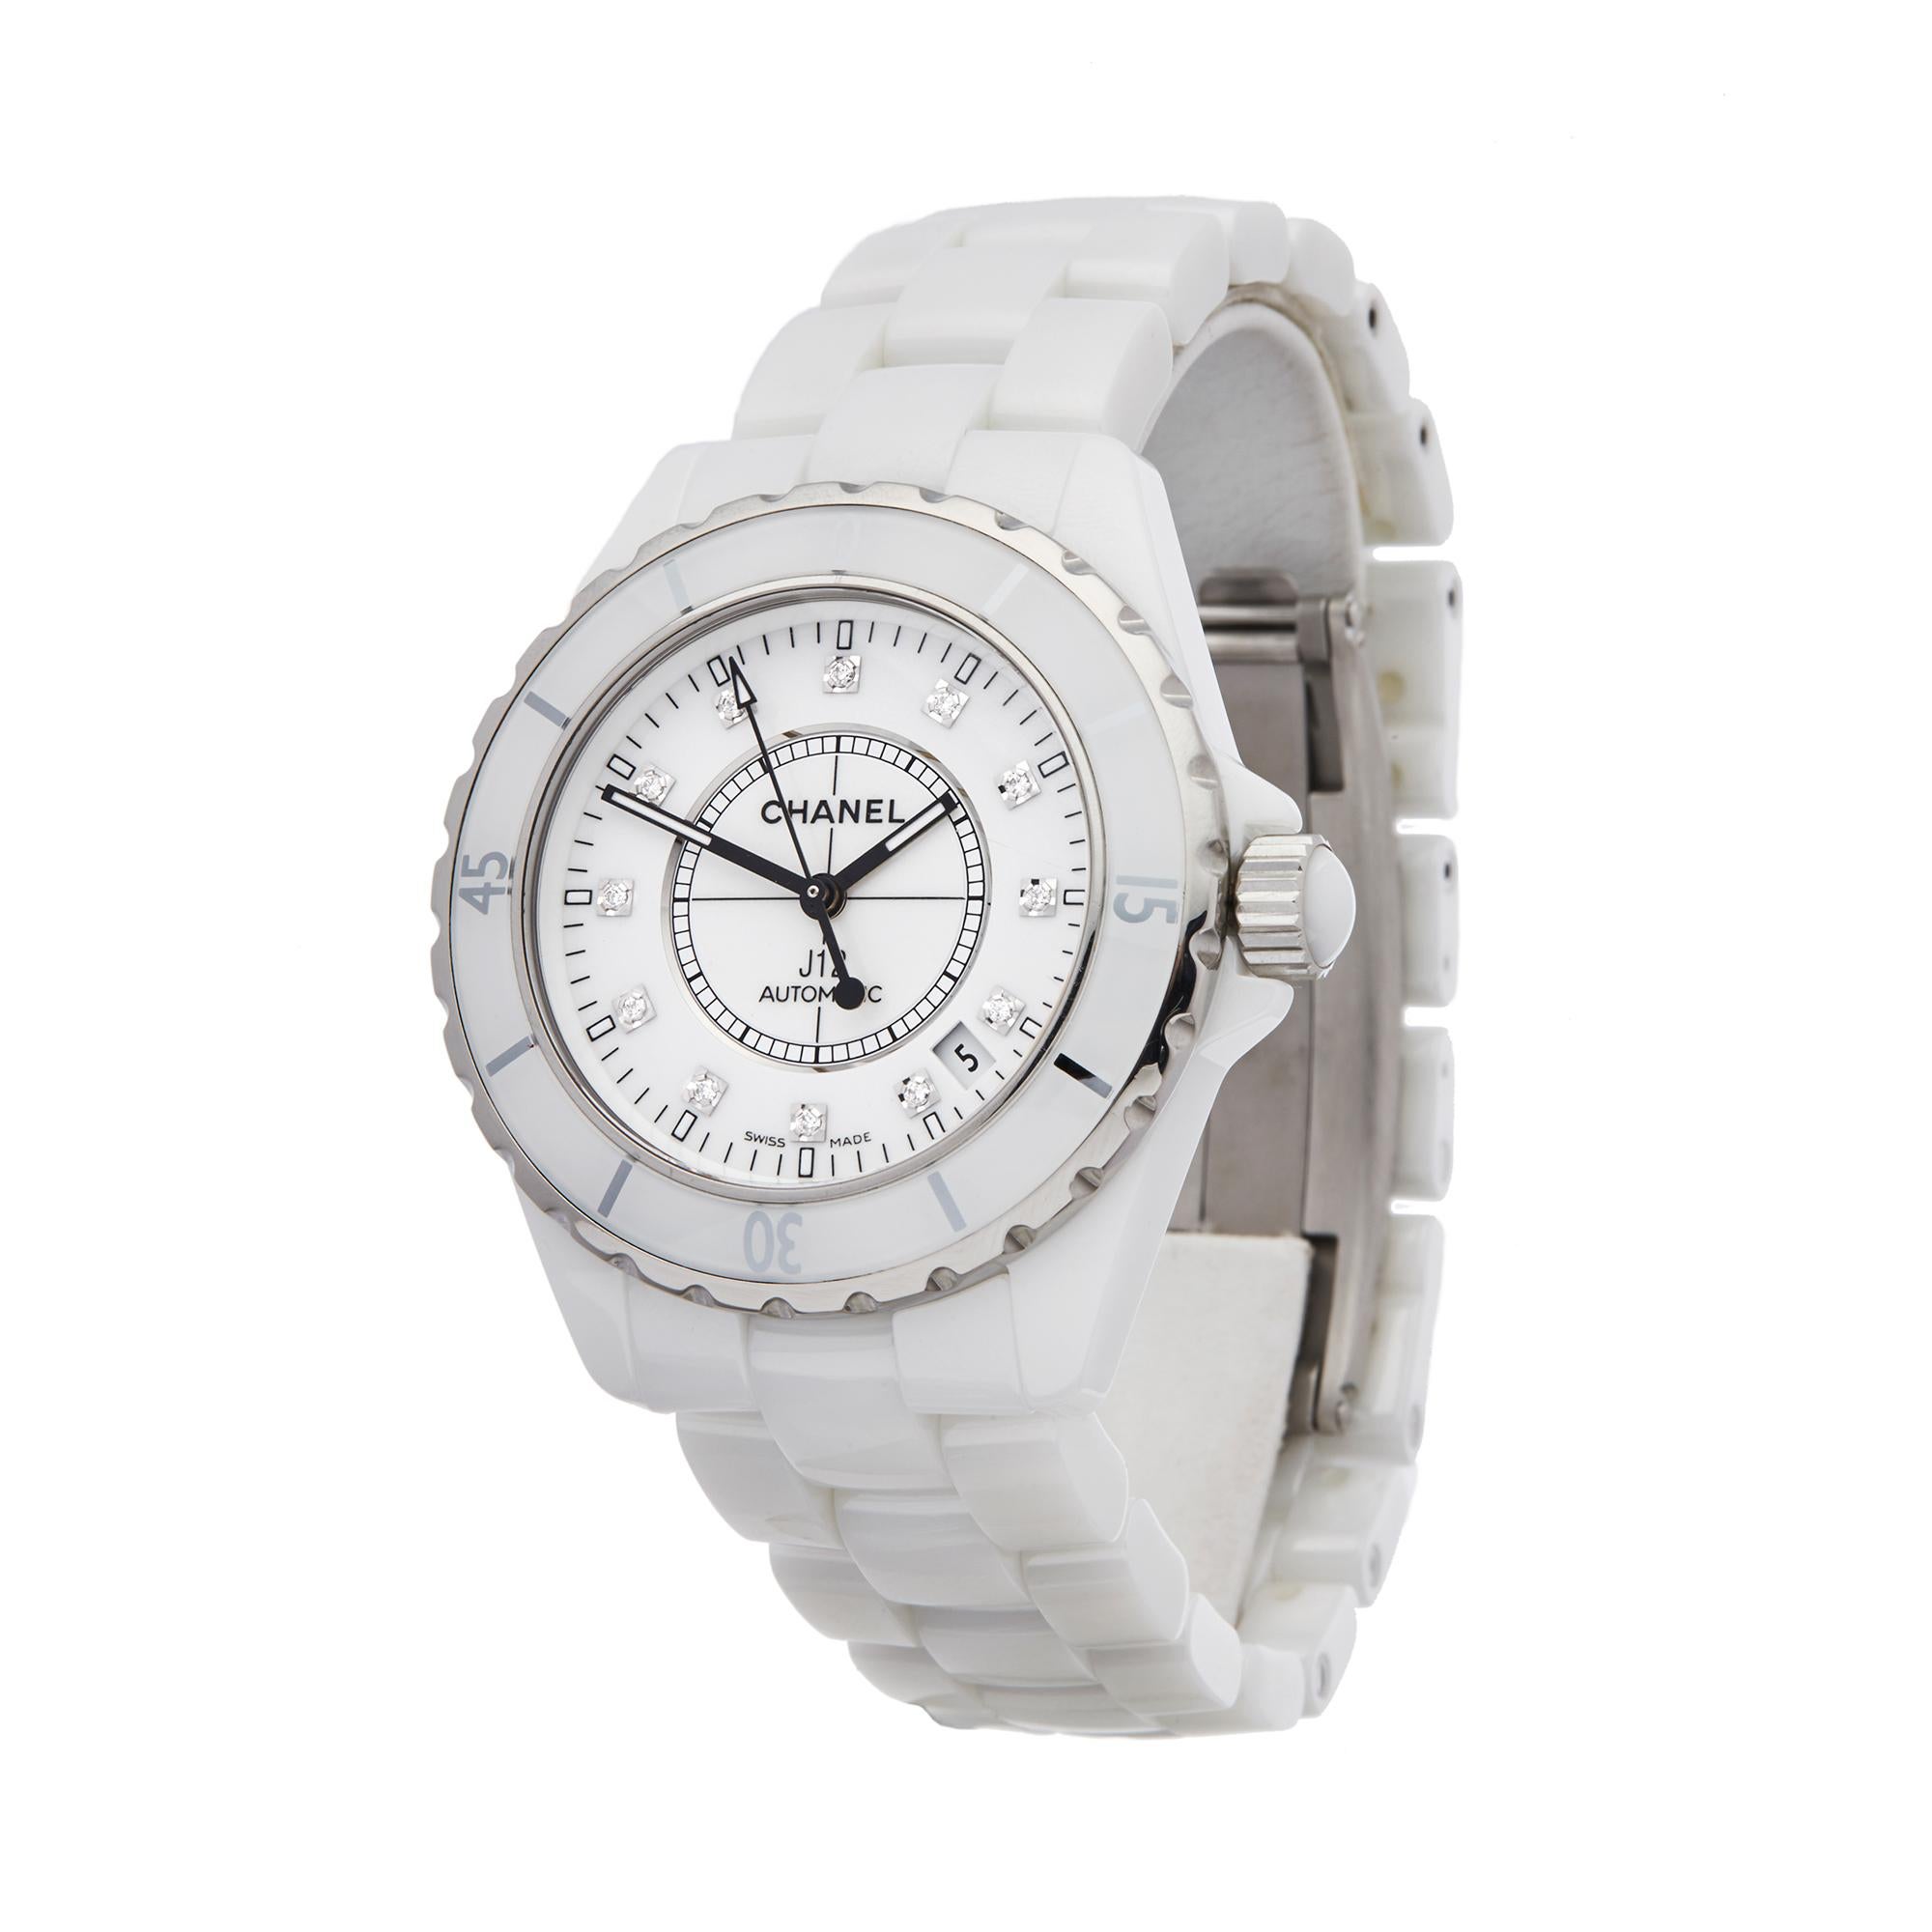 Reference: COM2025
Manufacturer: Chanel
Model: J12
Model Reference: H1629
Age: 2nd May 2007
Gender: Women's
Box and Papers: Box, Manuals and Guarantee
Dial: White Diamond
Glass: Sapphire Crystal
Movement: Automatic
Water Resistance: To Manufacturers